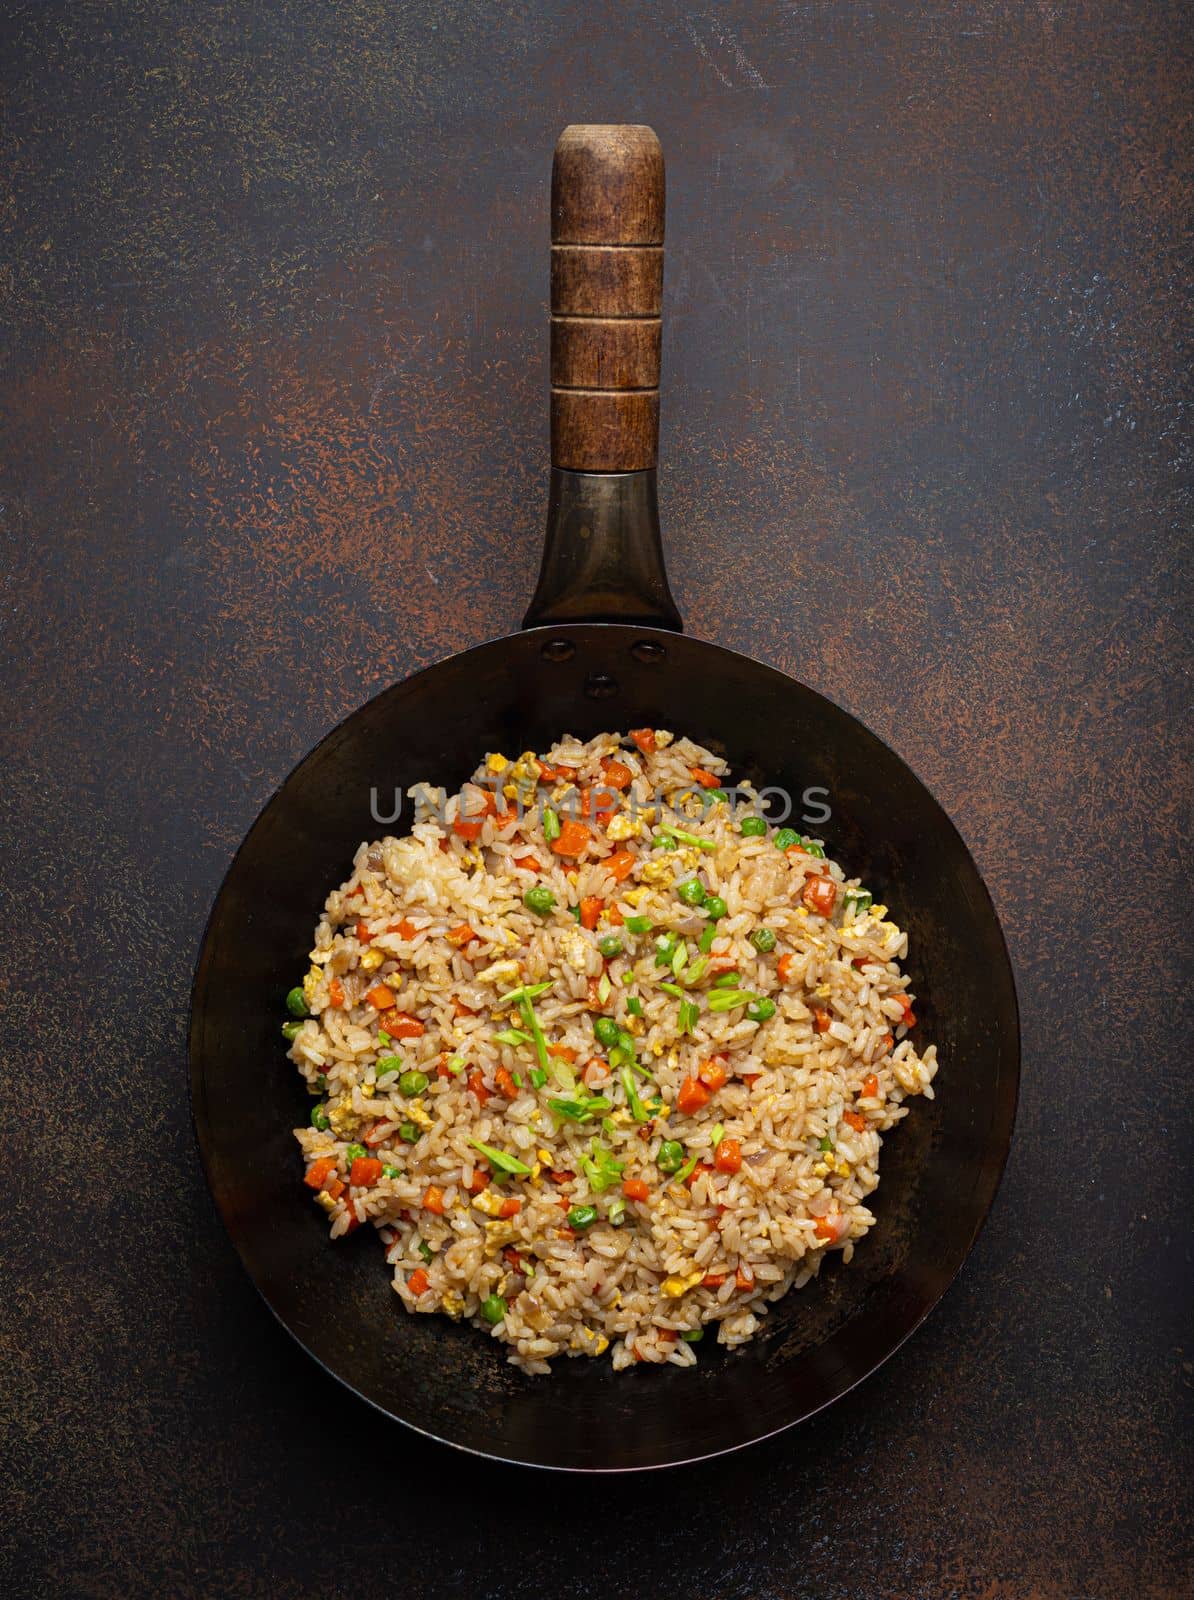 Authentic Chinese and Asian fried rice with egg and vegetables in wok top view, rustic concrete table background. Traditional dish of China by its_al_dente